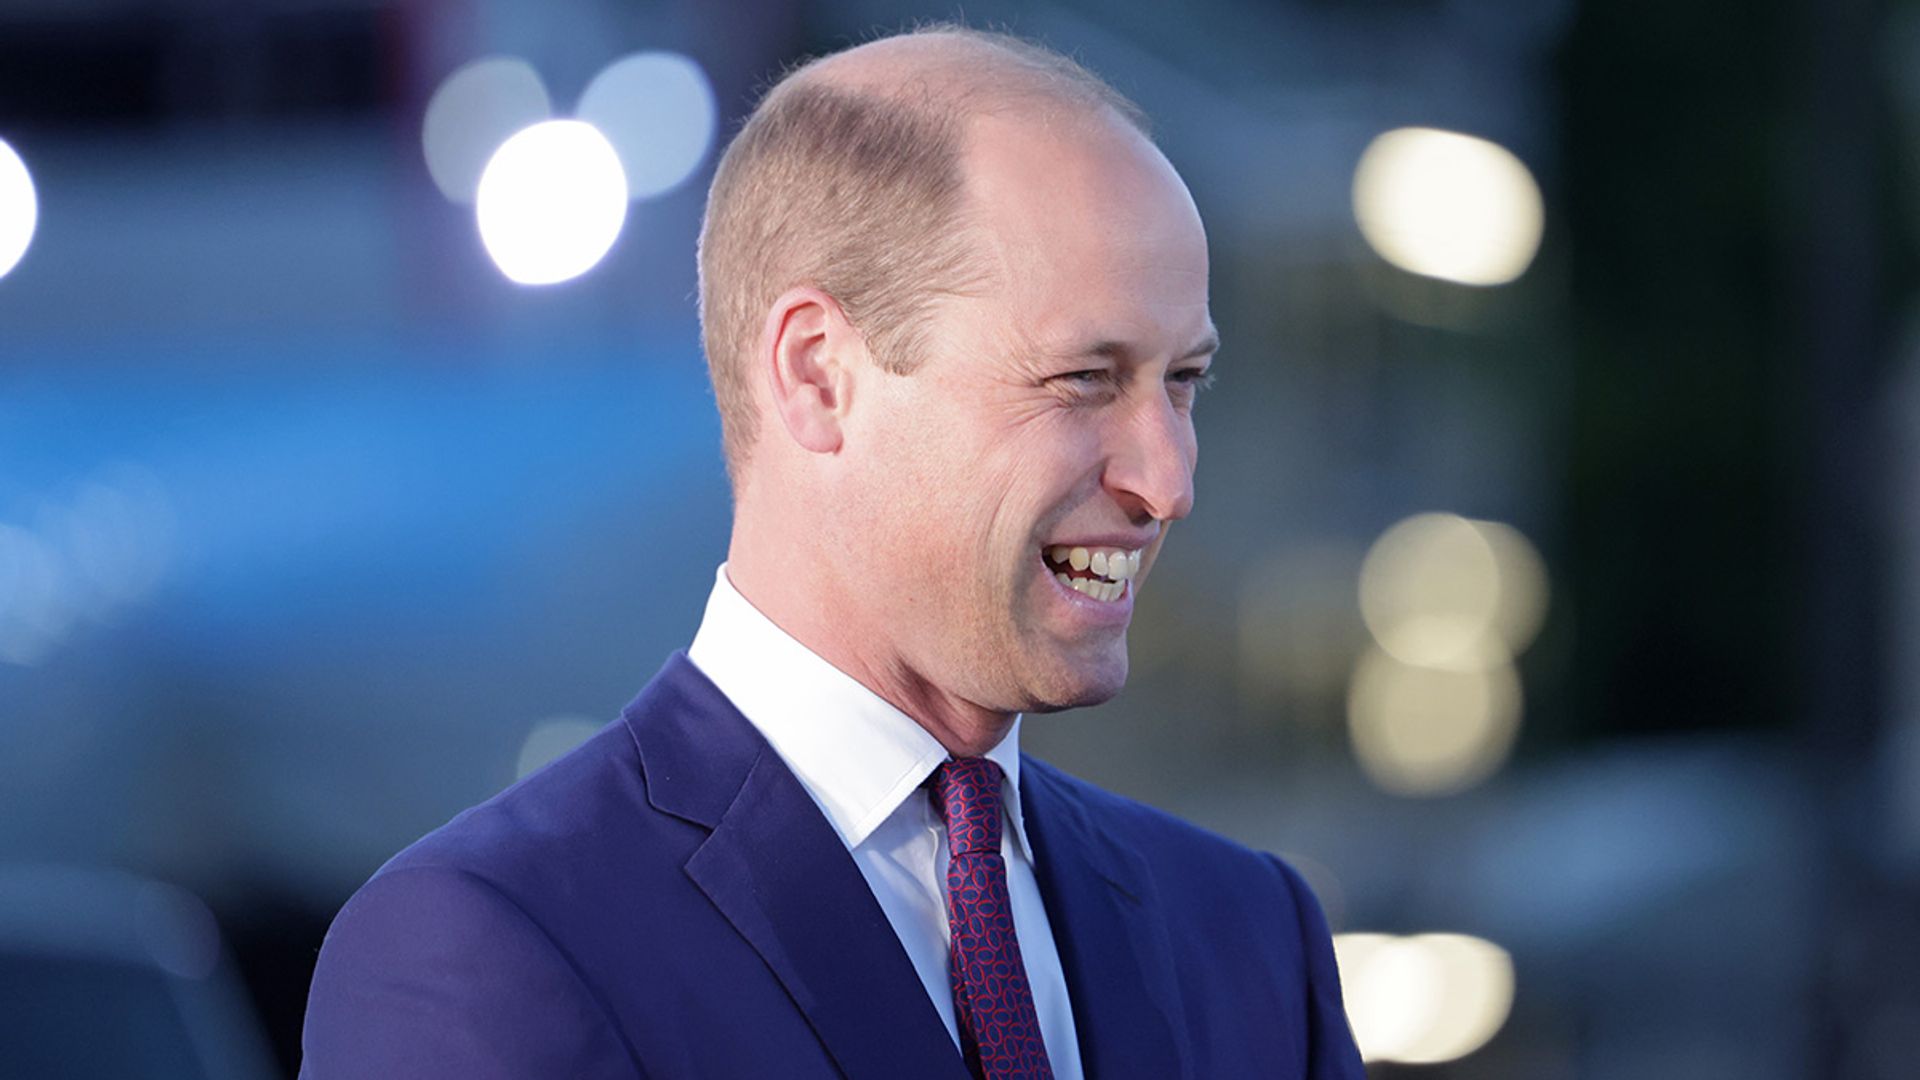 prince william popped cheeky question to dame deborah james